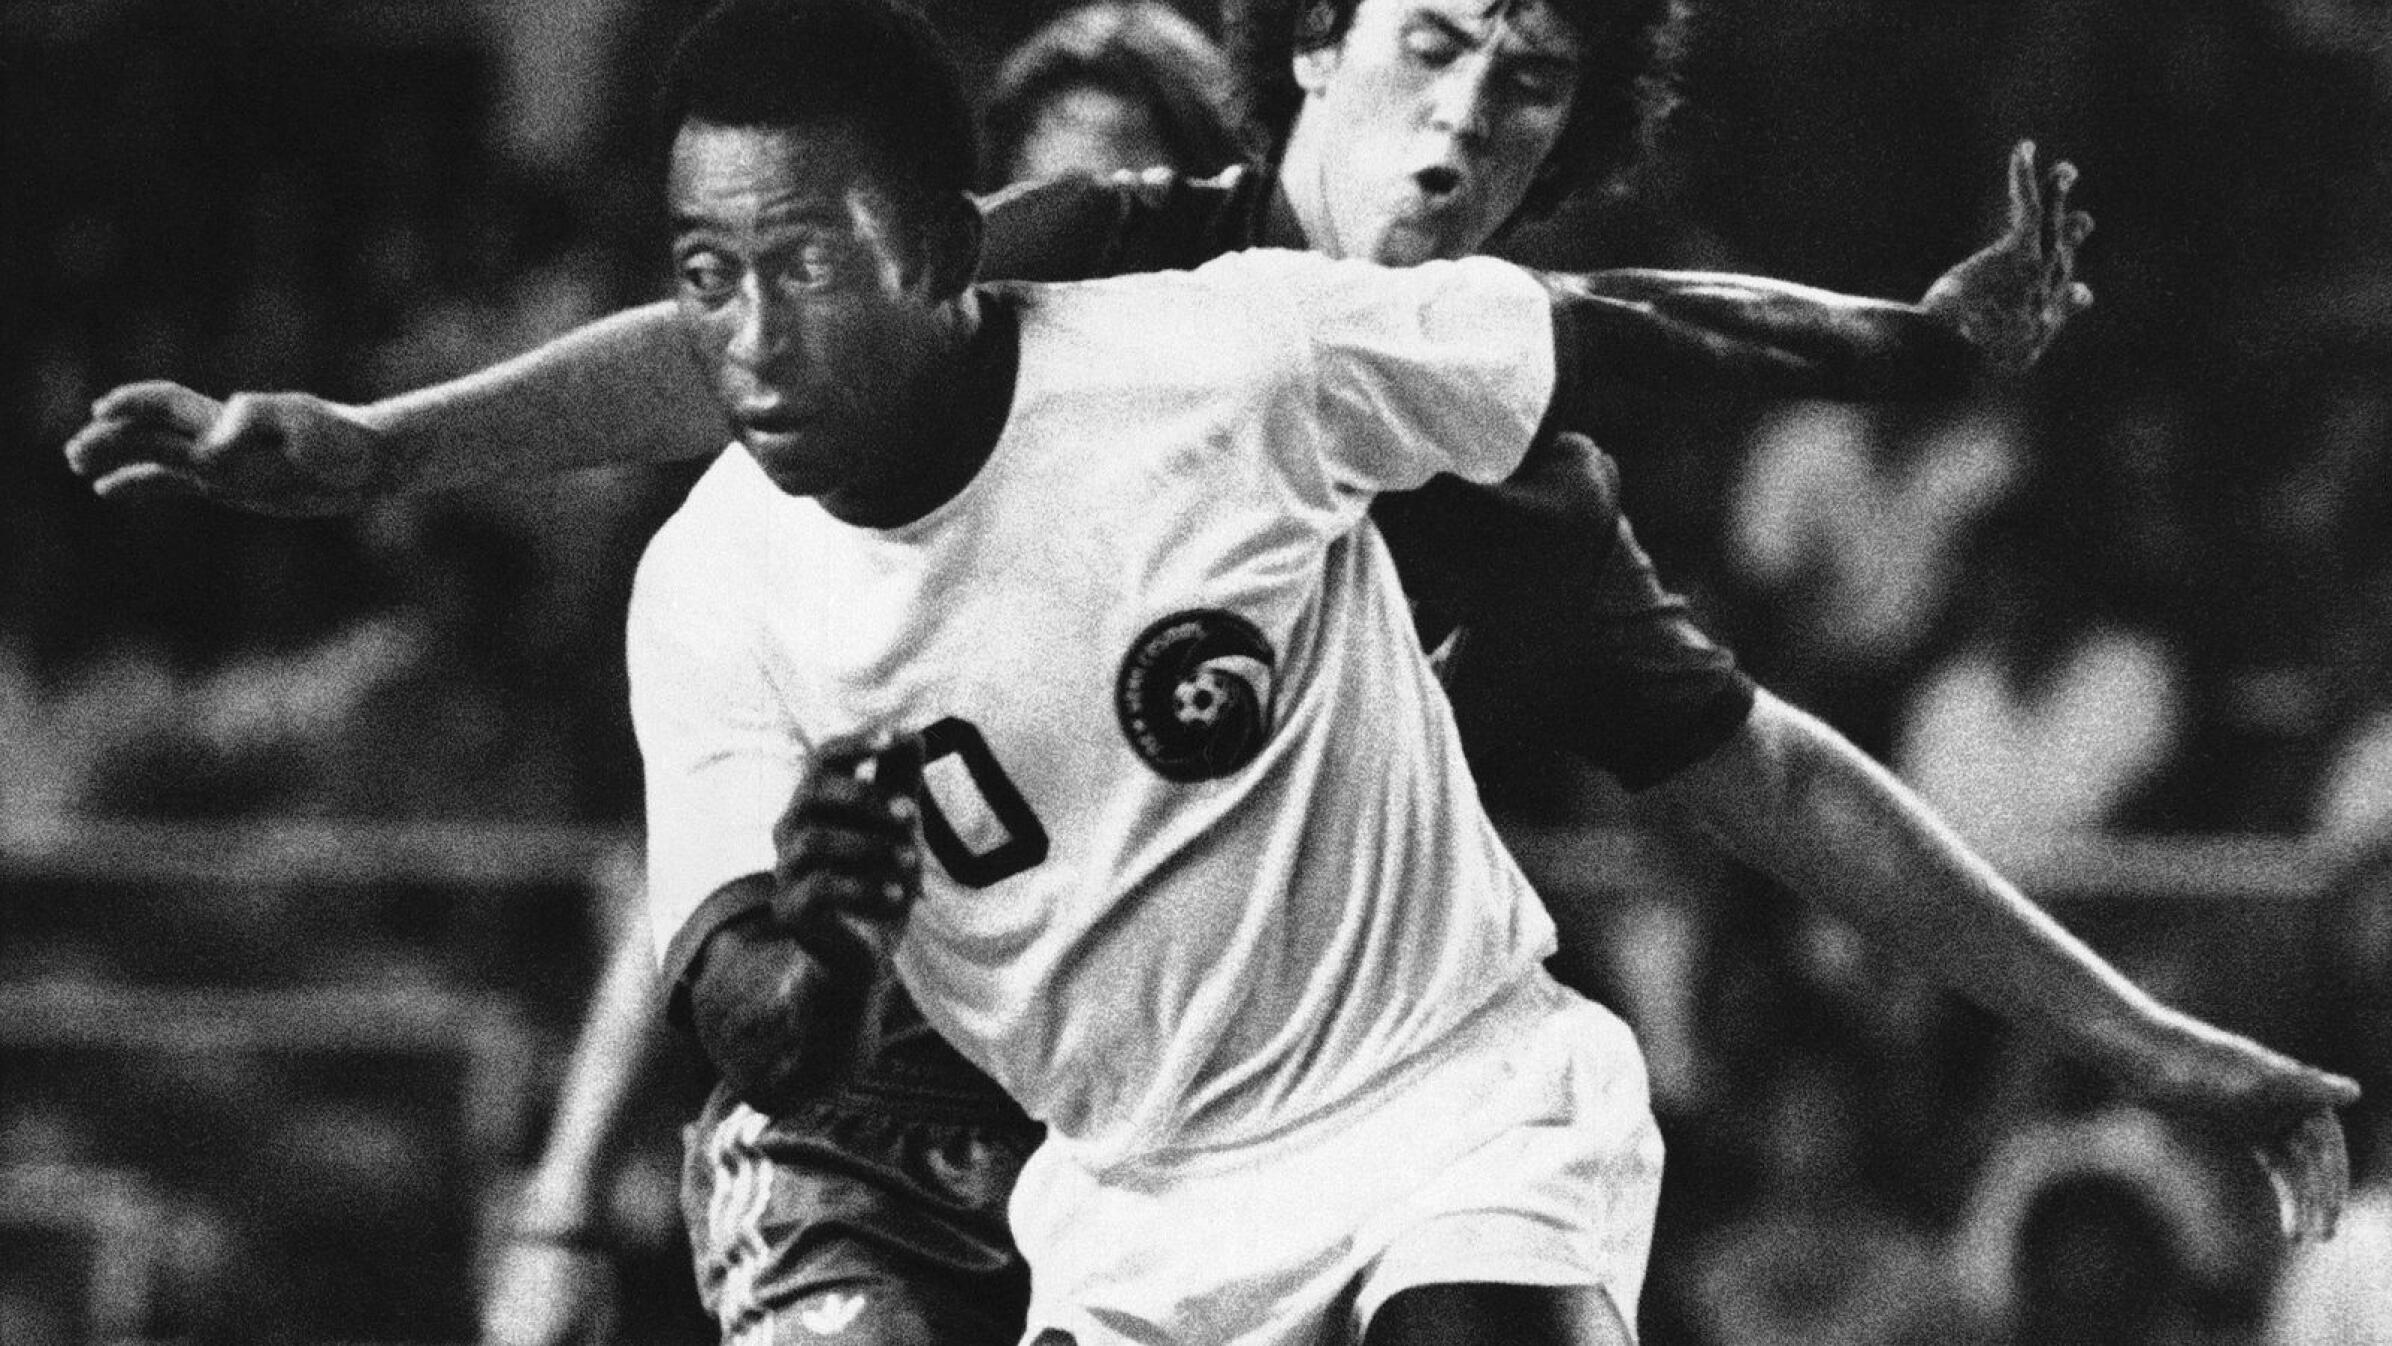 Celebrating Pele, the greatest player in World Cup history - The